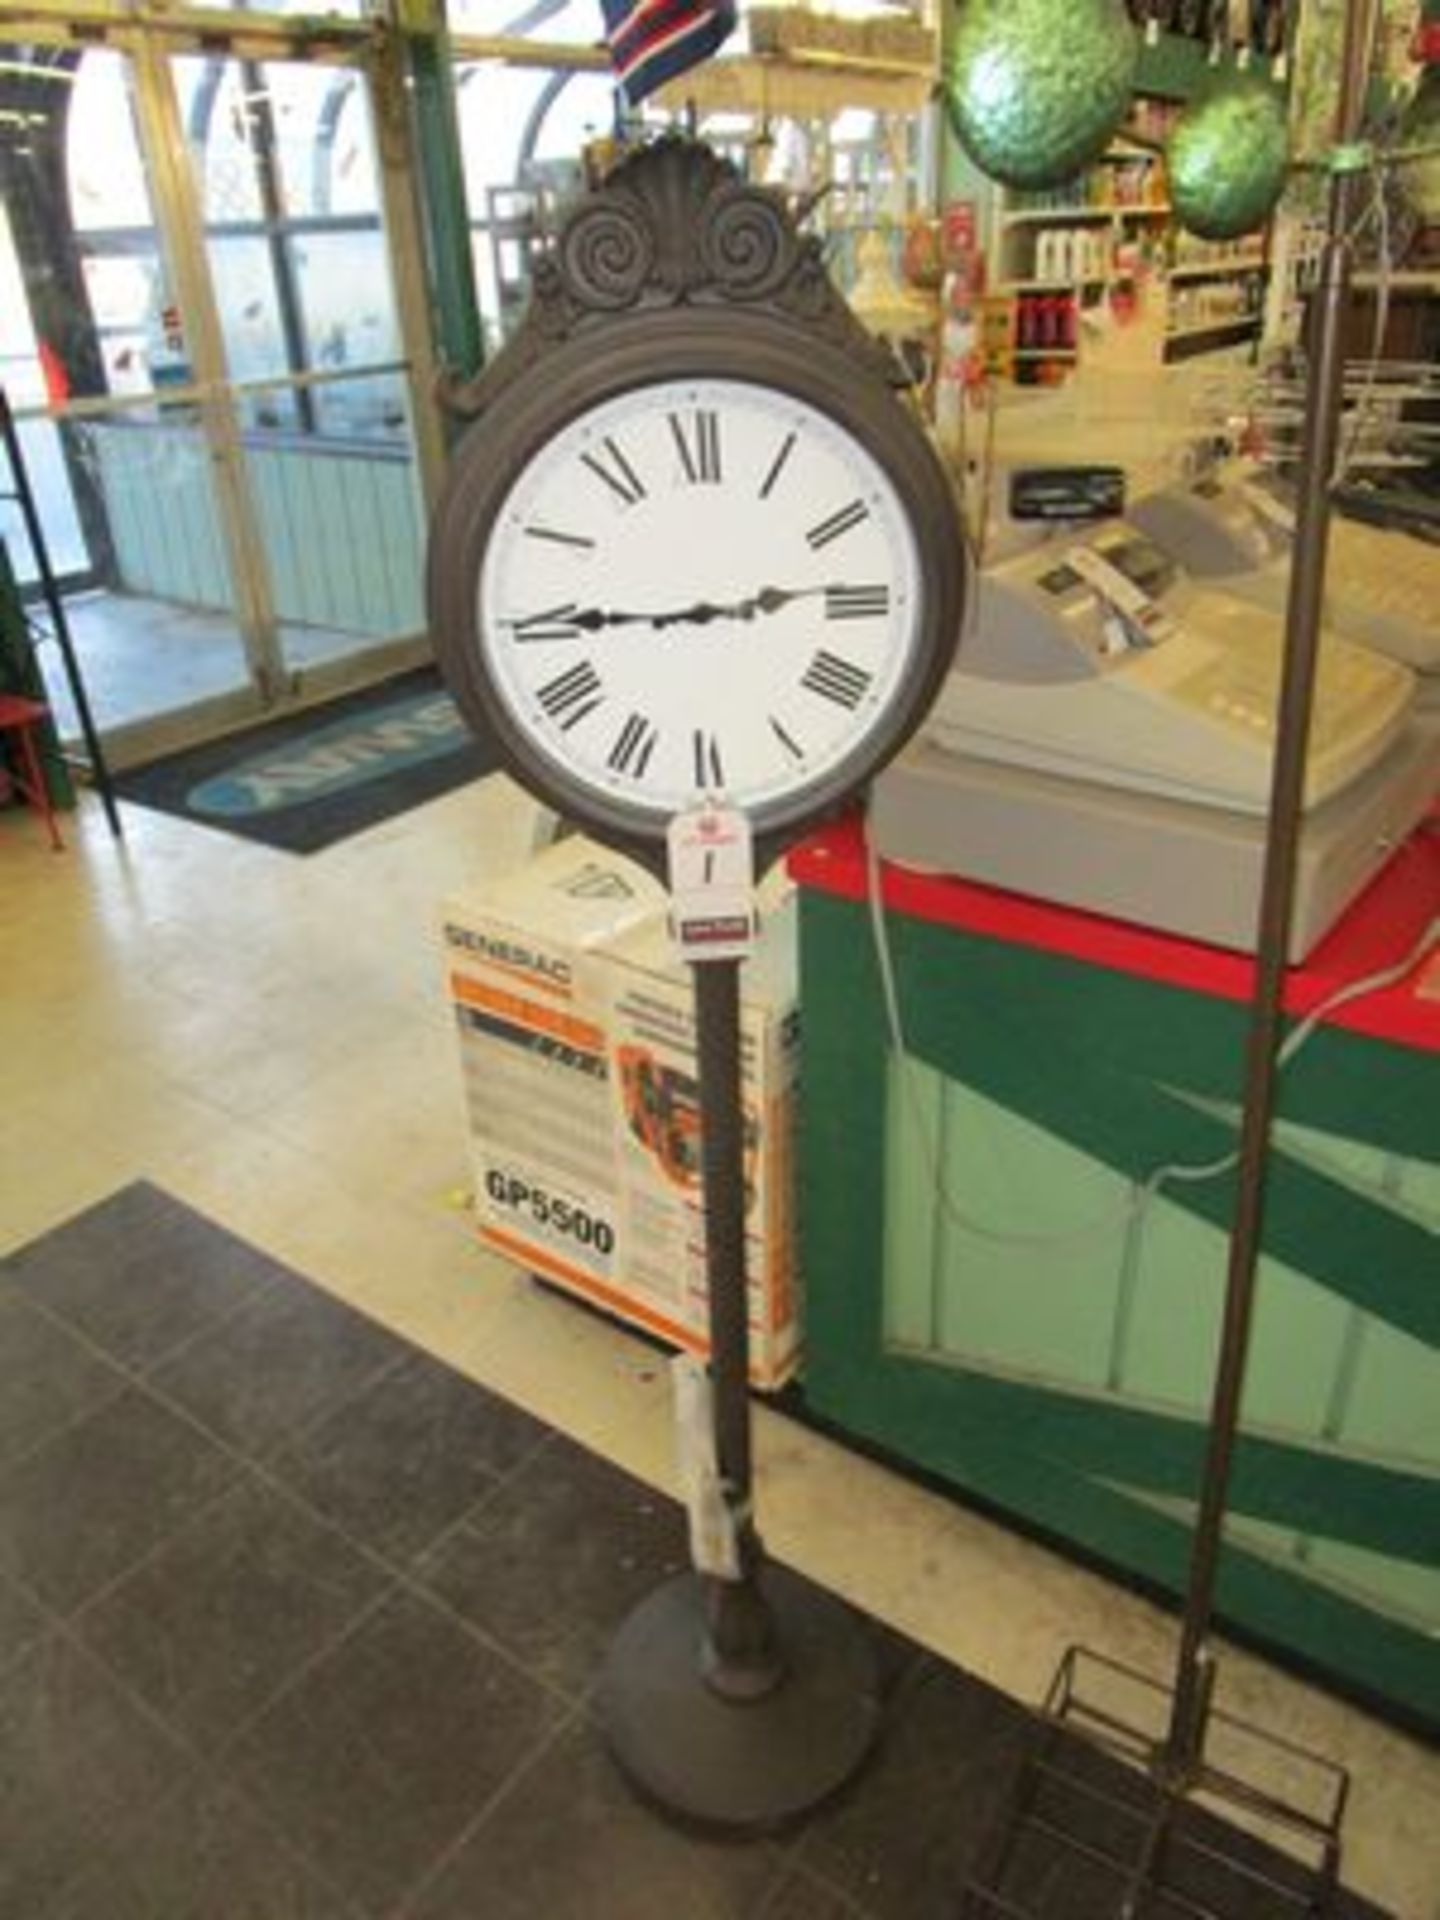 OUTDOOR PEDESTAL CLOCK/THERMOMETER